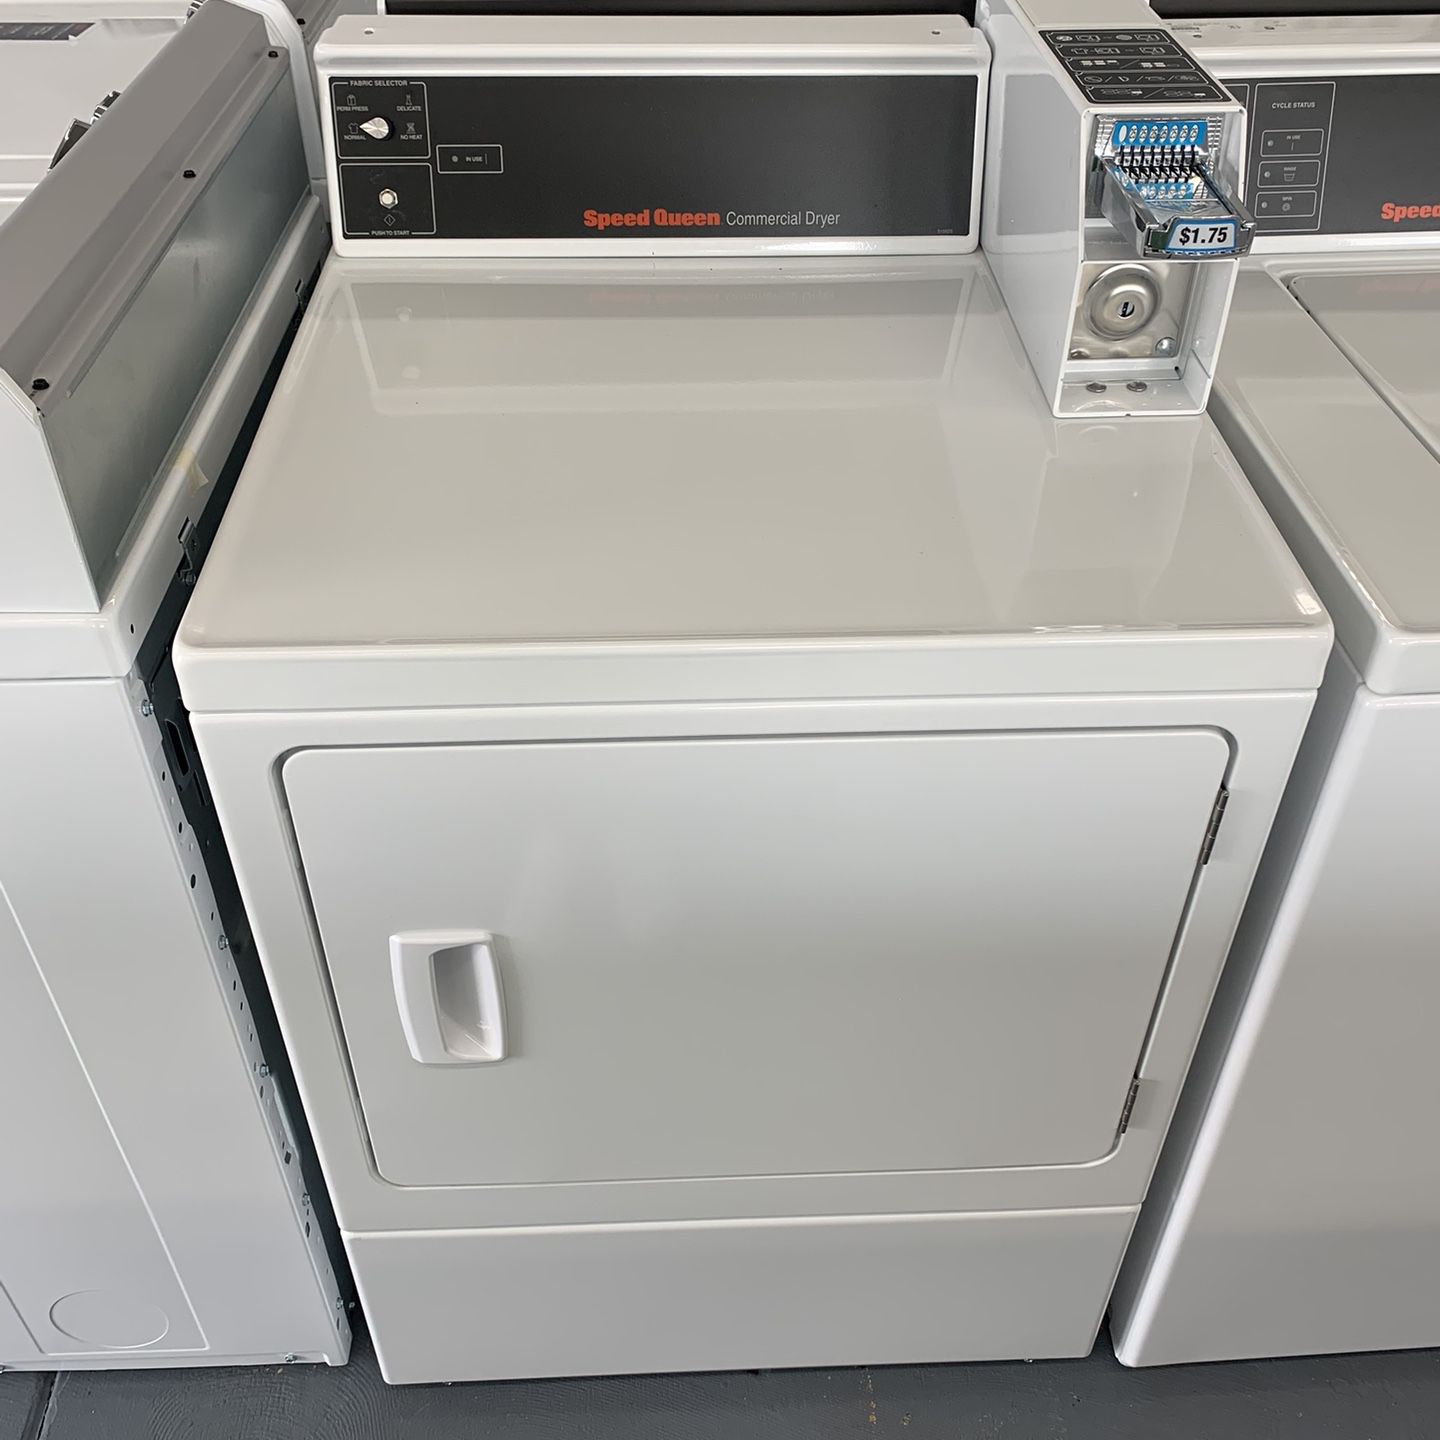 Speed Queen Commercial Front Load Dryer: White 7 Cu. Ft. Capacity, 4 Dry Cycles, Coin-Slide Control, Reversible Door $1,899 